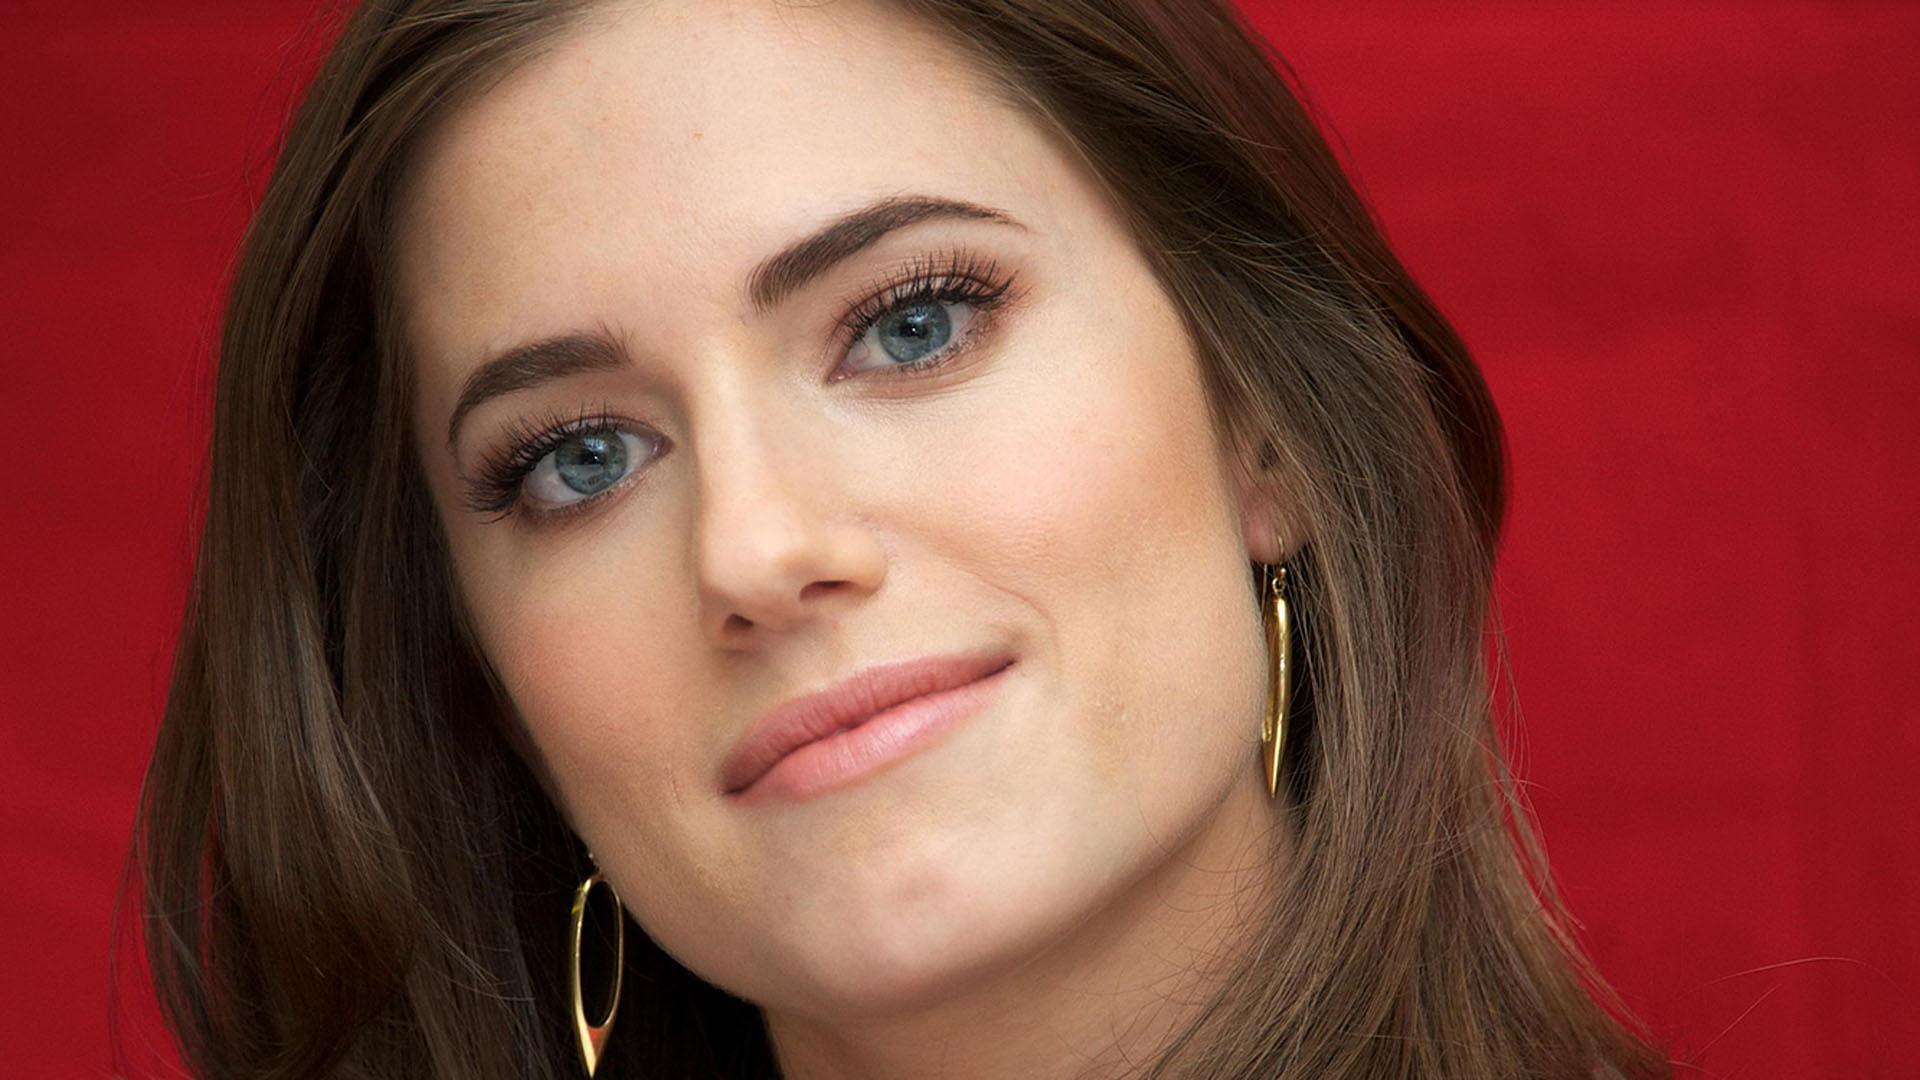 Allison Williams Wallpapers and Backgrounds Image.